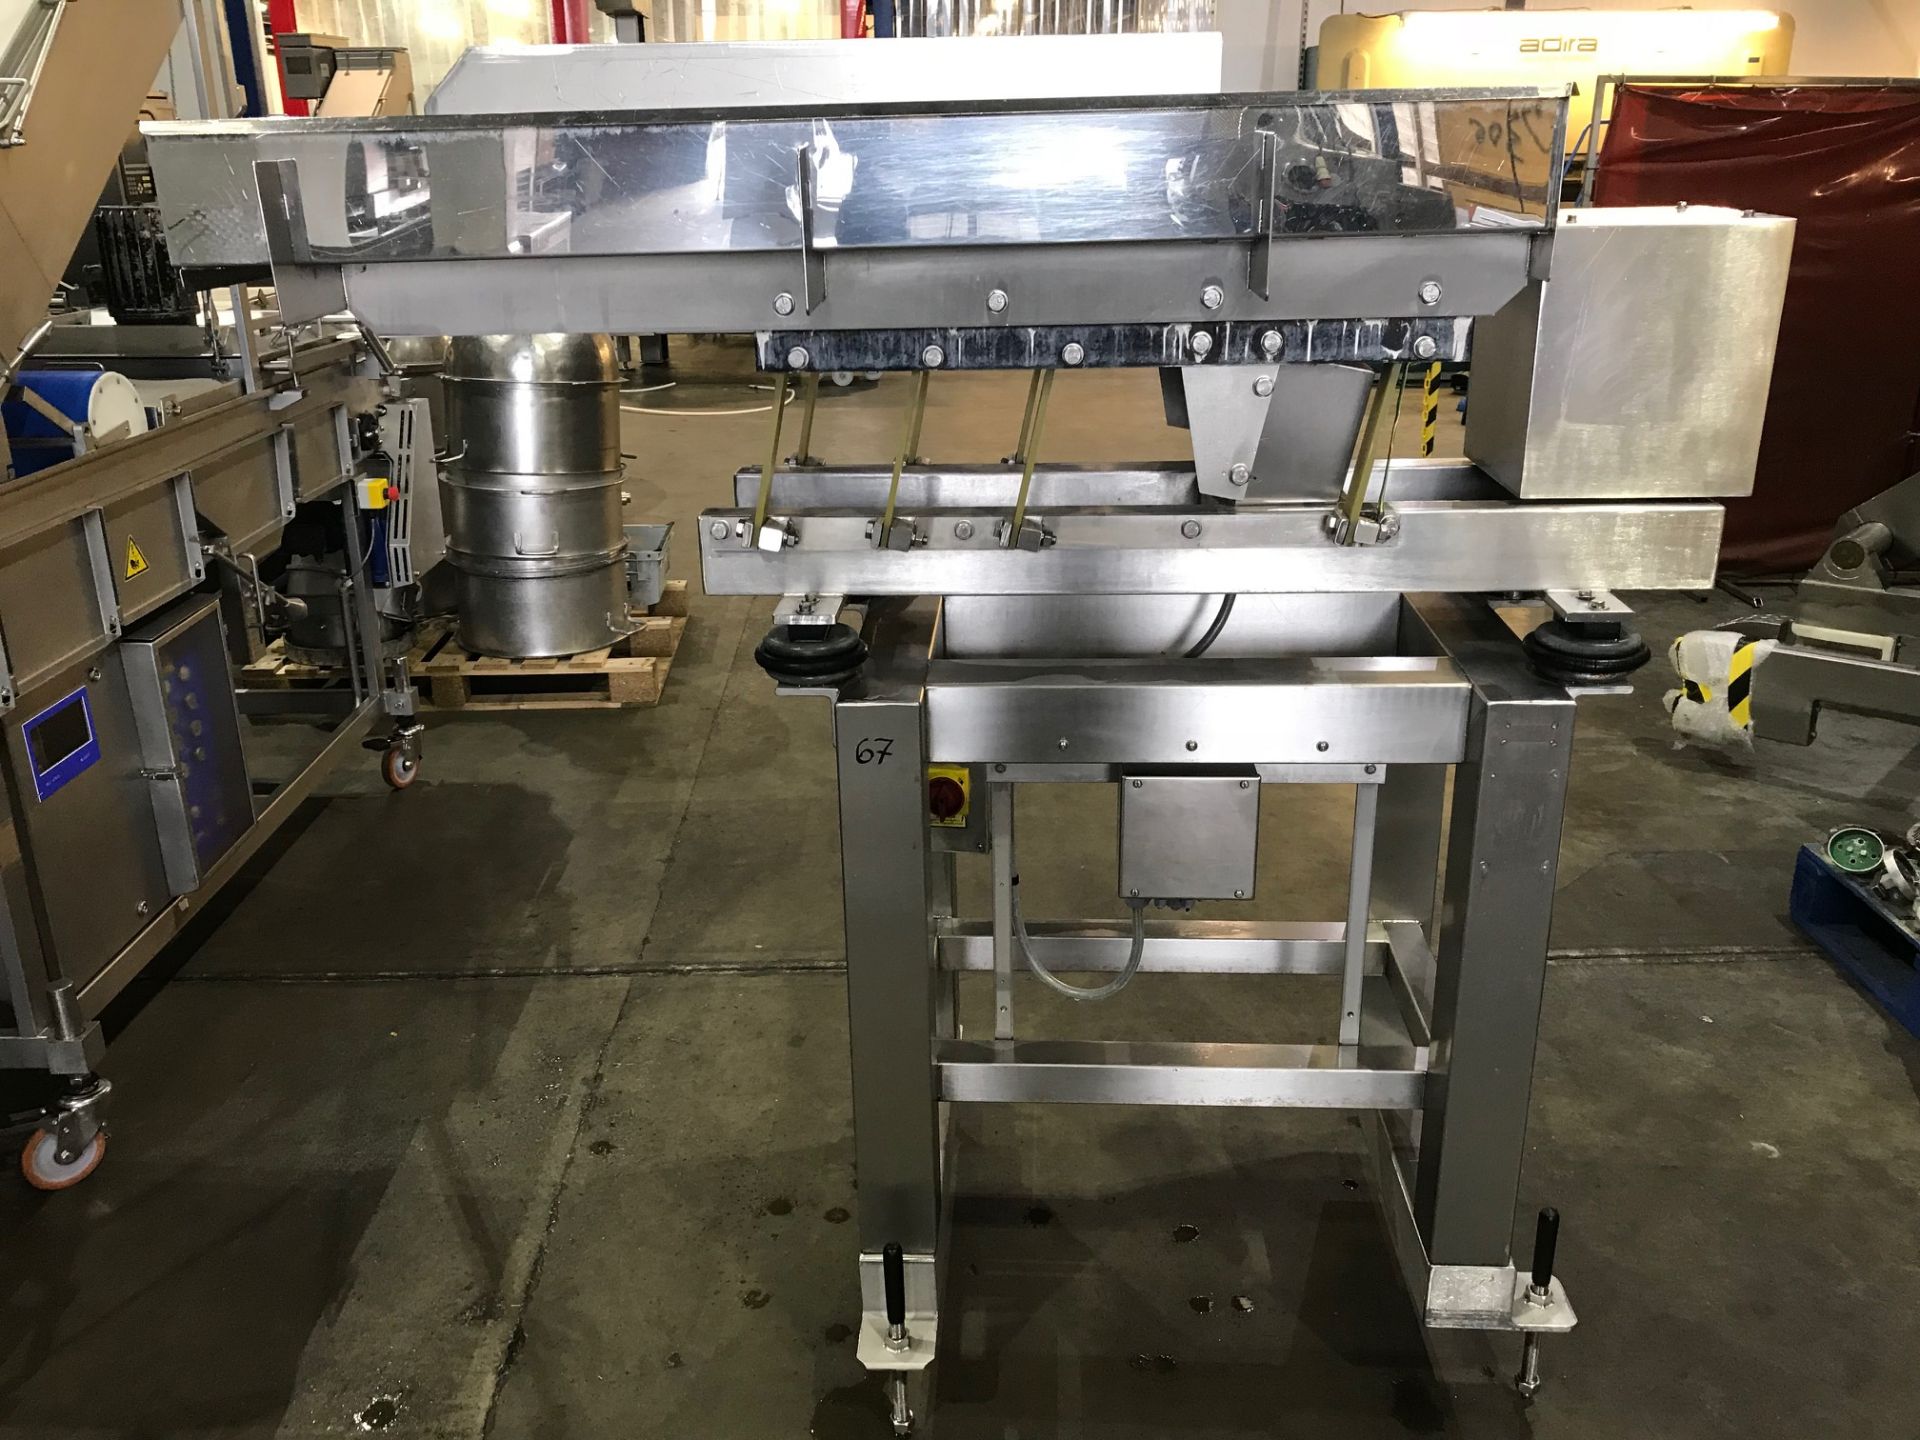 Stainless Steel Frame Mounted Vibratory Feeder